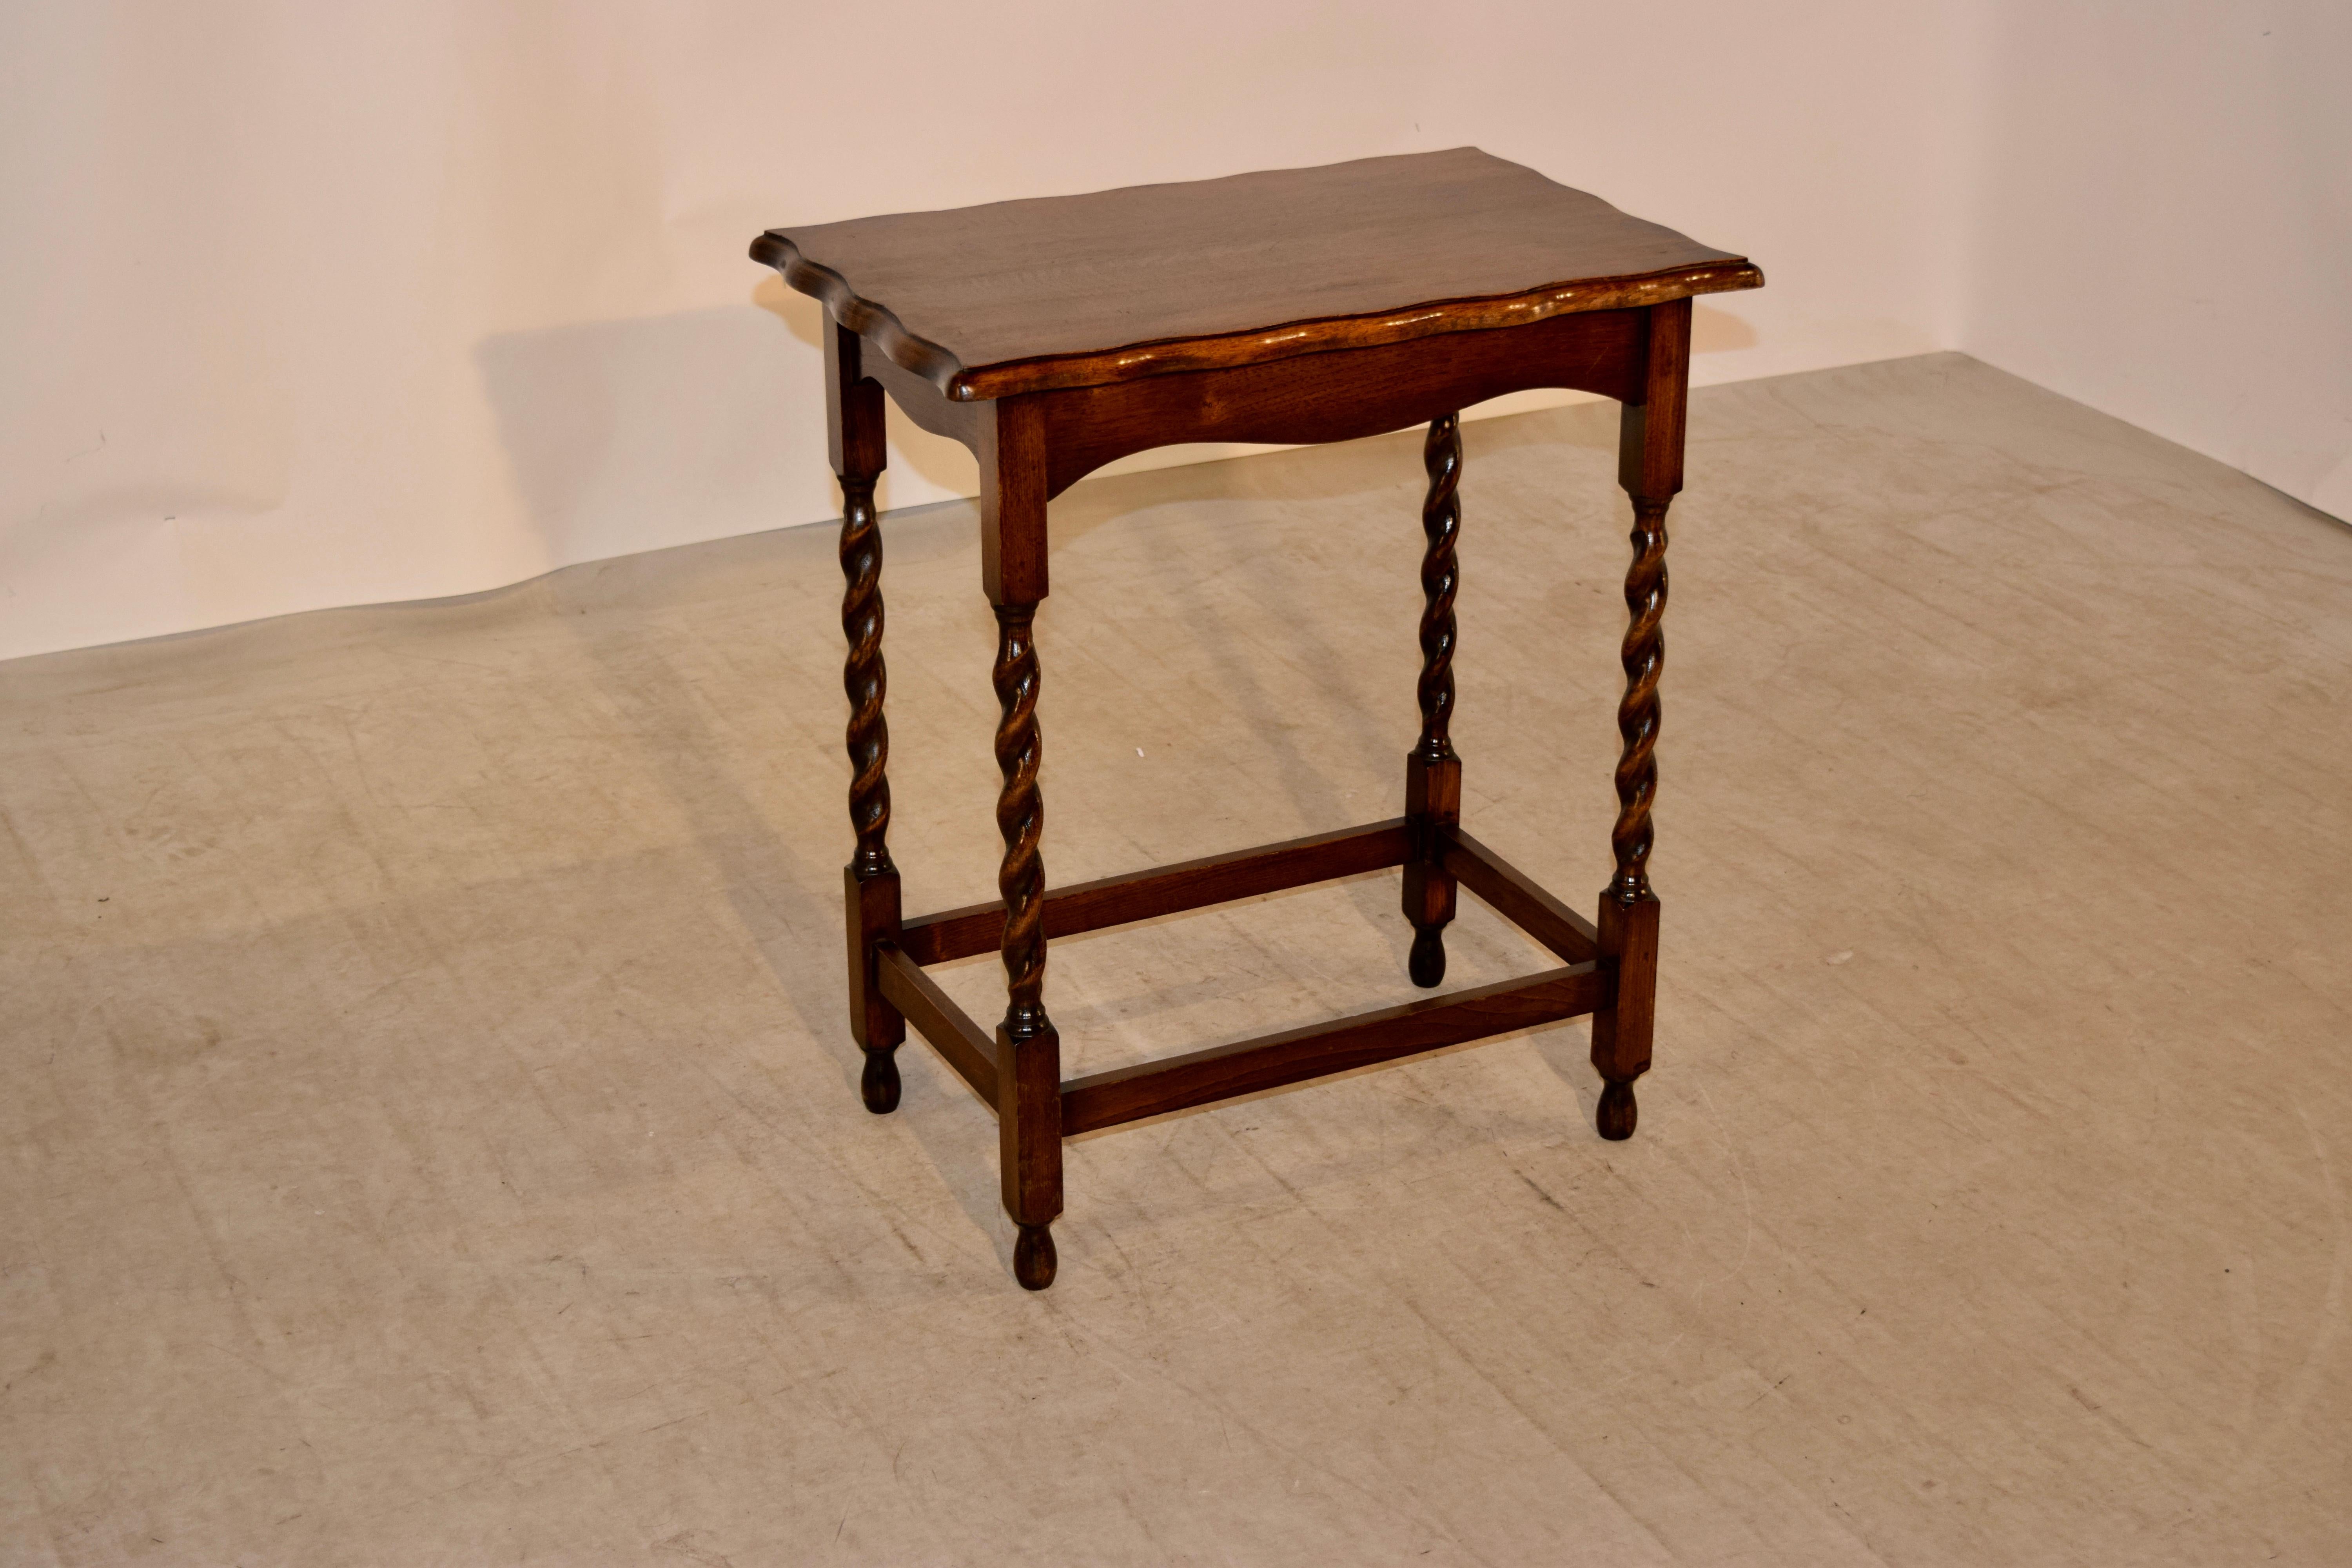 English oak side table with a scalloped and beveled edge around the top and a simple apron, supported on hand turned barley twist legs joined by simple stretchers and raised on turned feet, circa 1900.